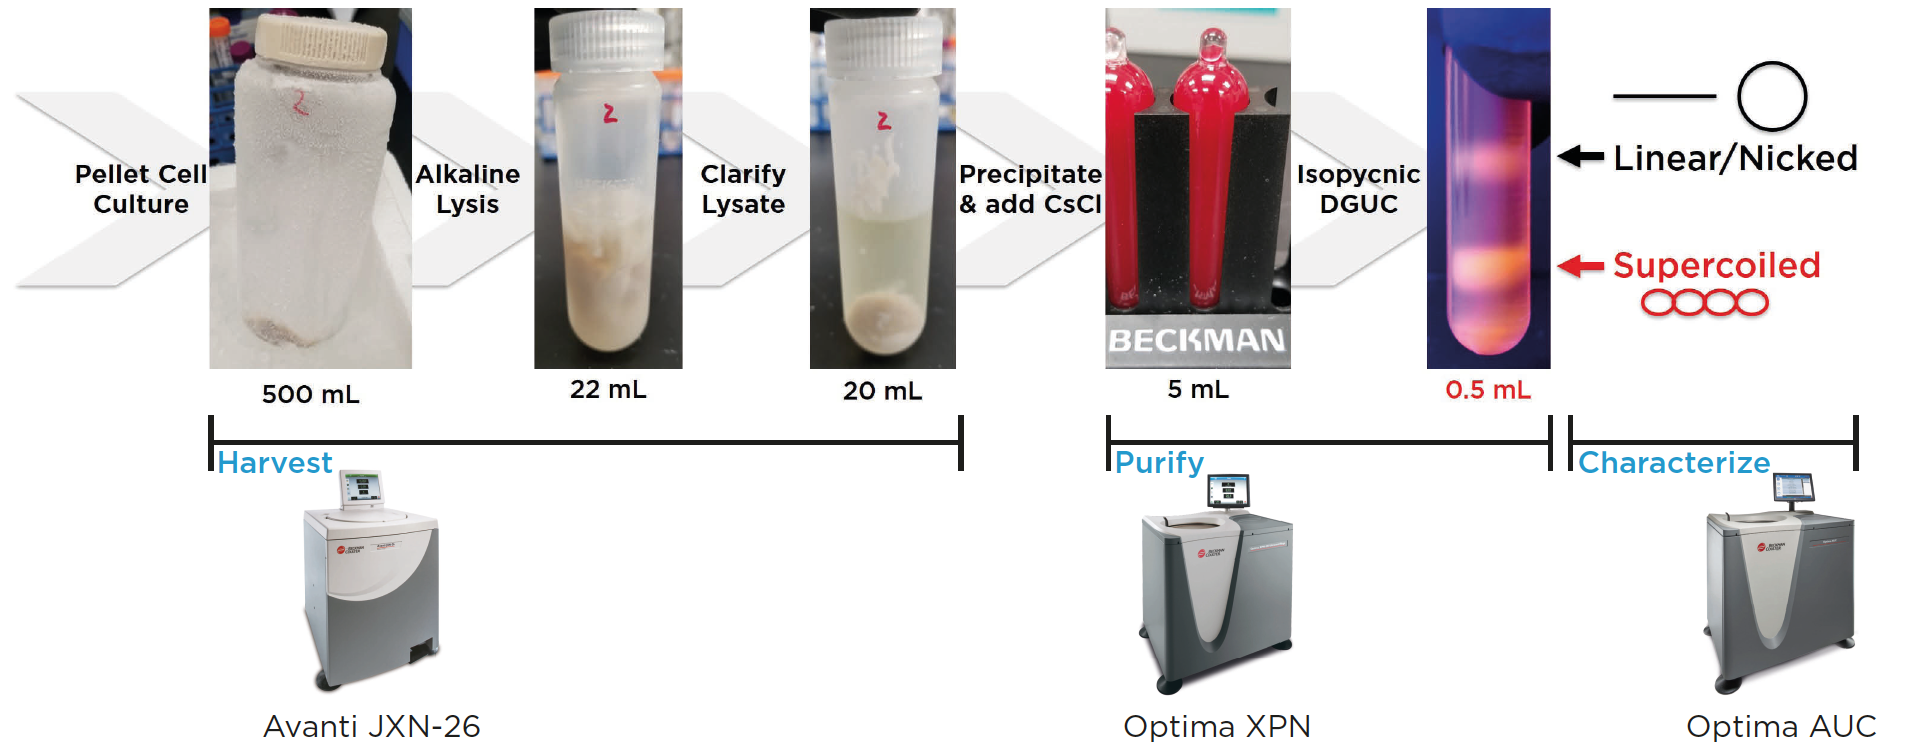 Example Workflow for DGUC Purification of Plasmid DNA